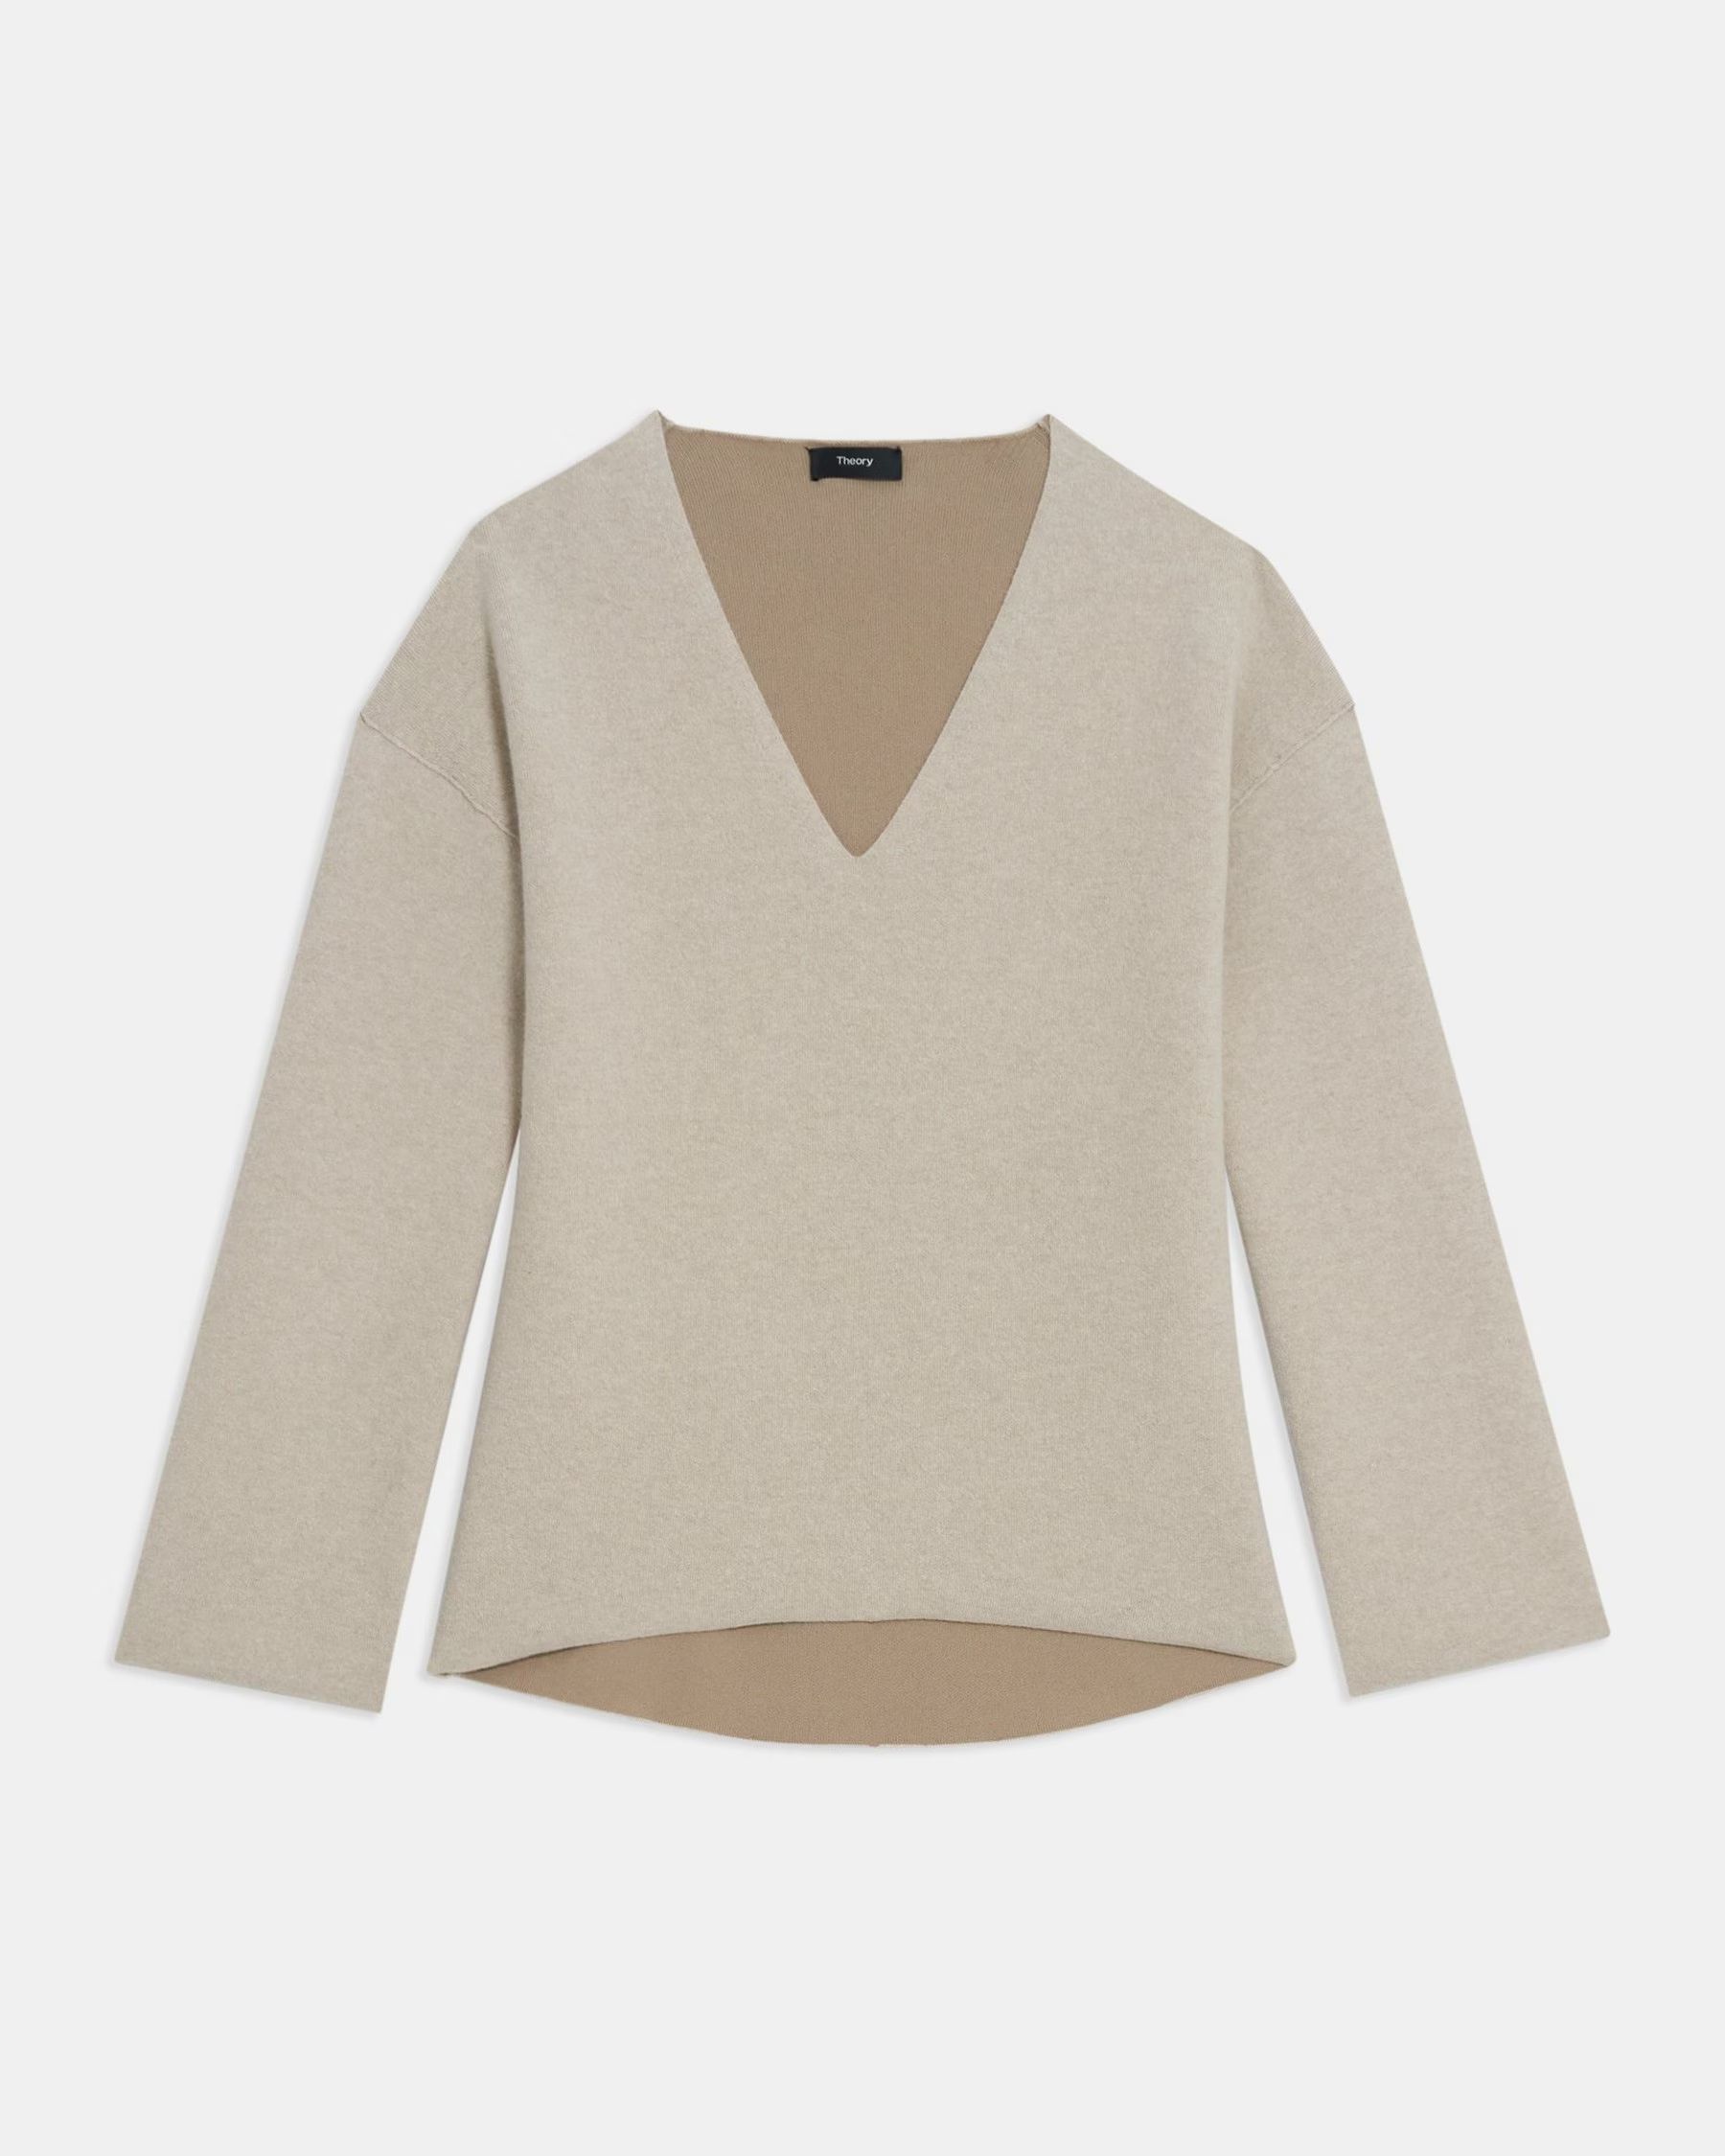 Reversible Karenia Sweater in Felted Wool-Cashmere | Theory UK